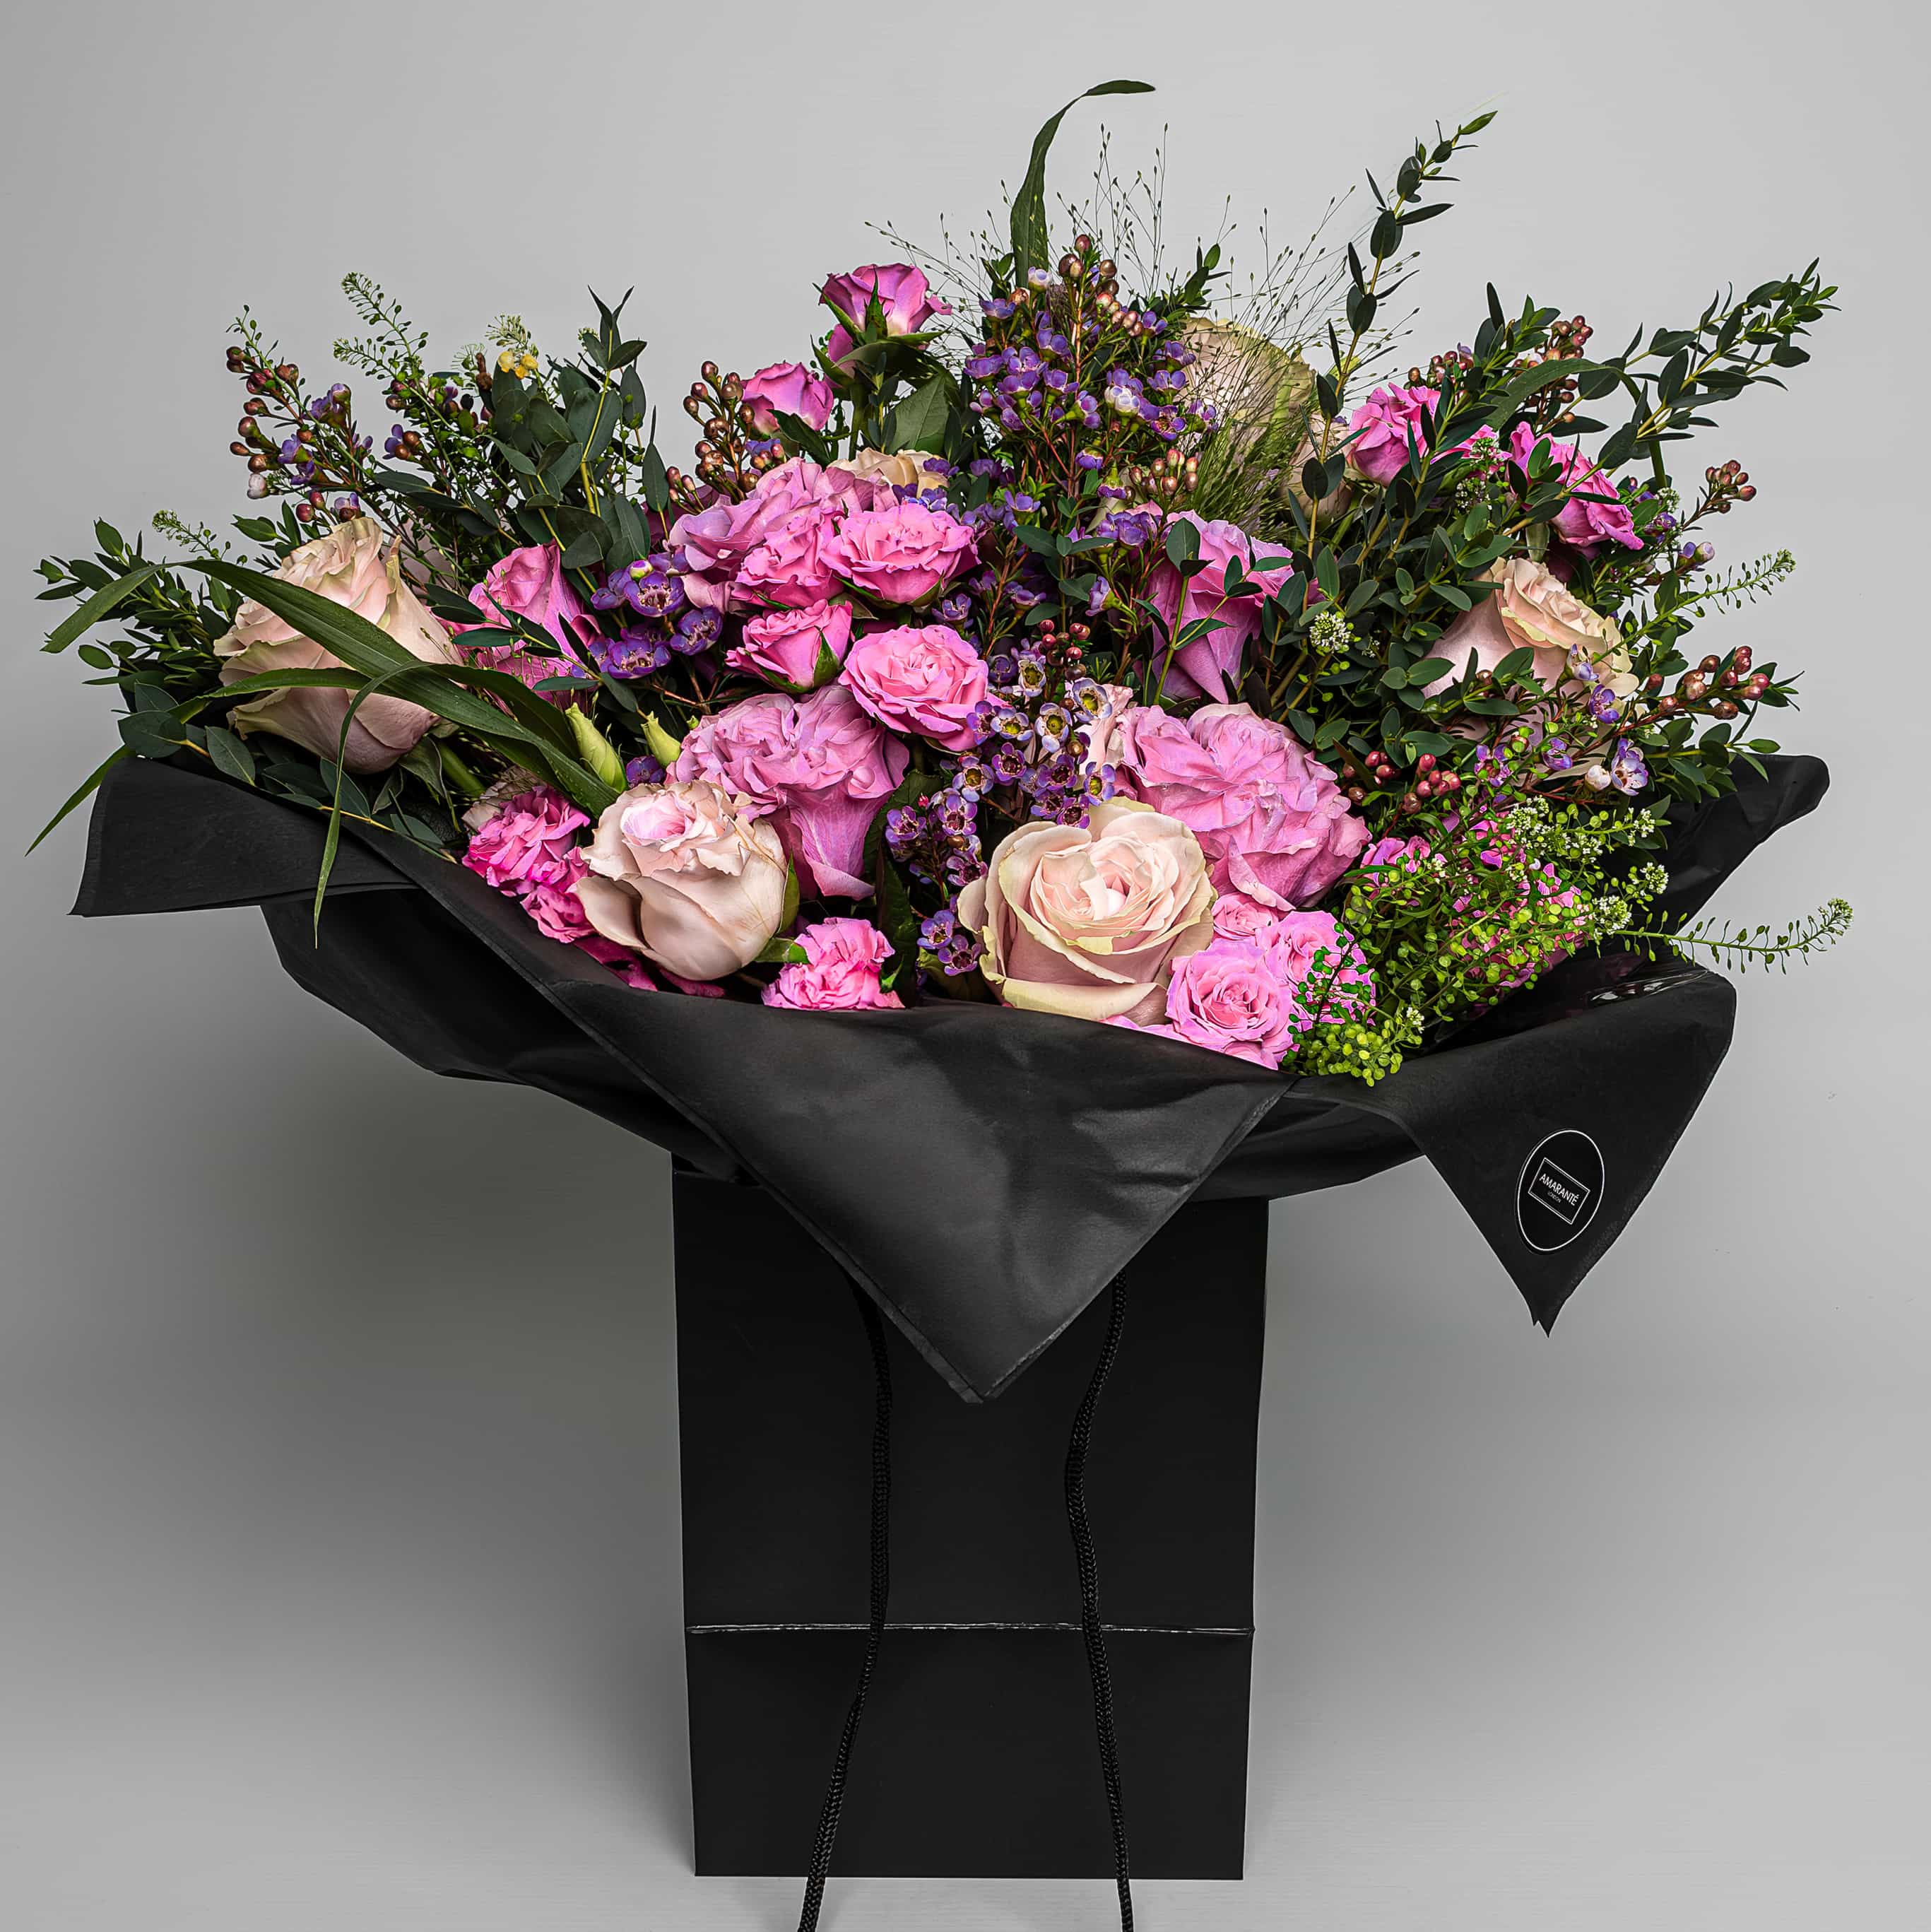 Exquisite Valentine&#39;s Day Bouquet of fresh, vibrant pink roses artfully arranged with stems and lavish green leaves. Convey your affection with this sophisticated, luxury bouquet boasting timeless elegance. Perfect for mesmerising your loved one this Vday. Free UK Delivery. Image source: Amarante London.